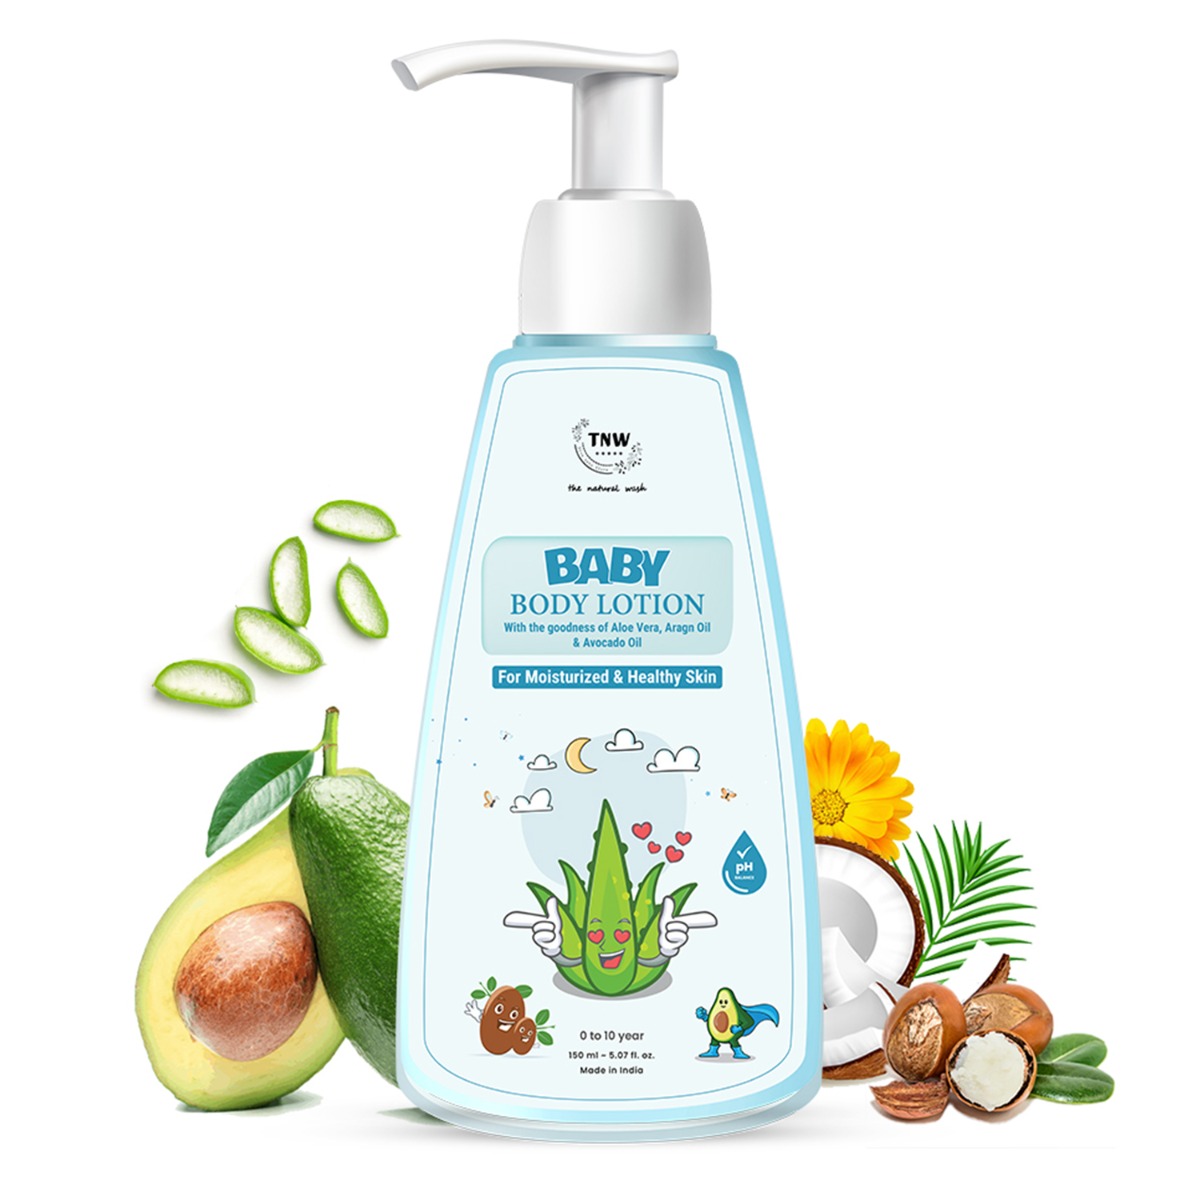 TNW - The Natural Wash Moisturizing Baby Body Lotion With Argan & Avocado Oil, 150ml